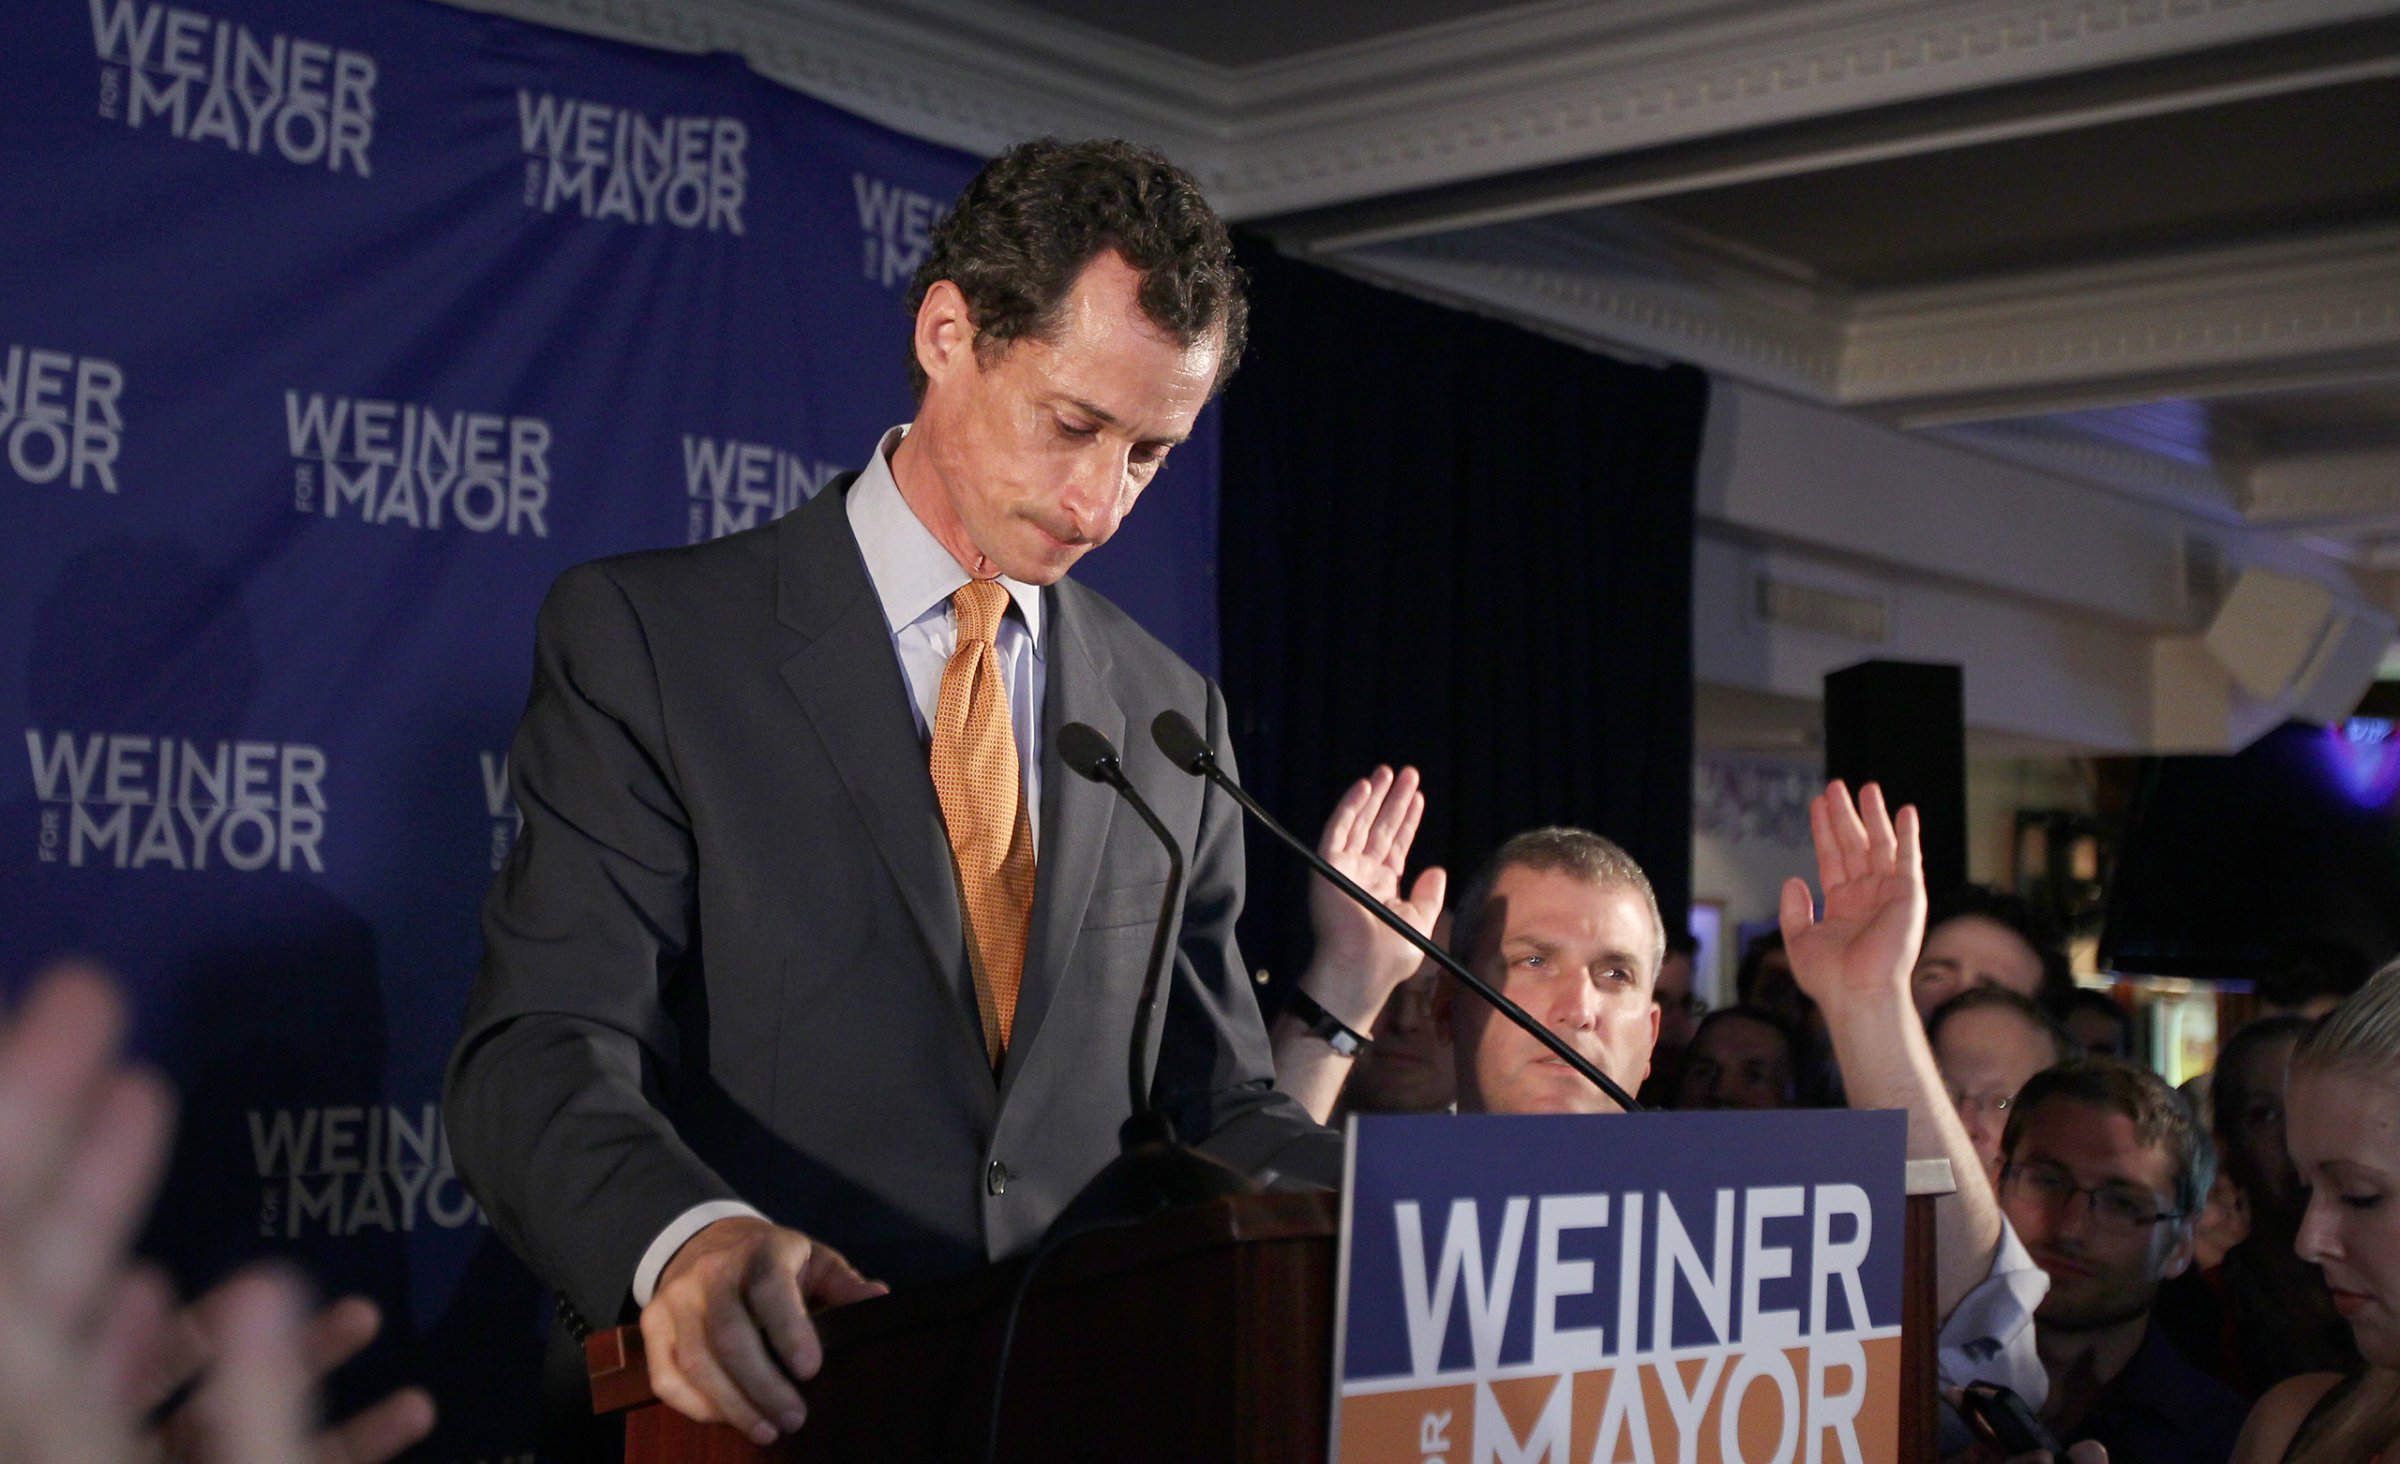 Democratic mayoral hopeful Anthony Weiner makes his concession speech at Connolly's Pub in midtown in New York City on Tuesday, Sept. 10, 2013.